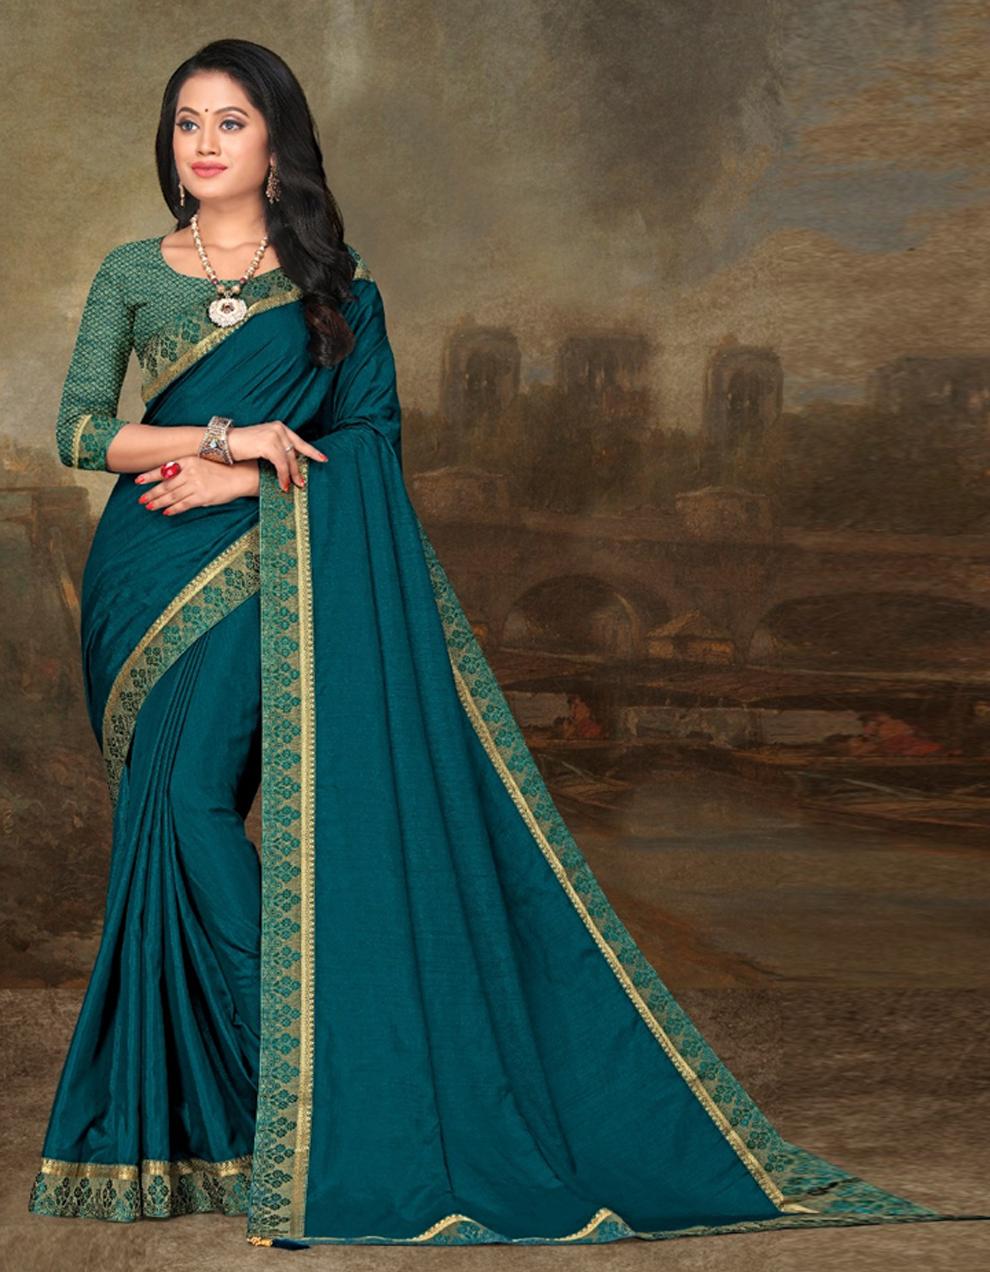 Teal Blue Vichitra silk Saree With Blouse IW23625